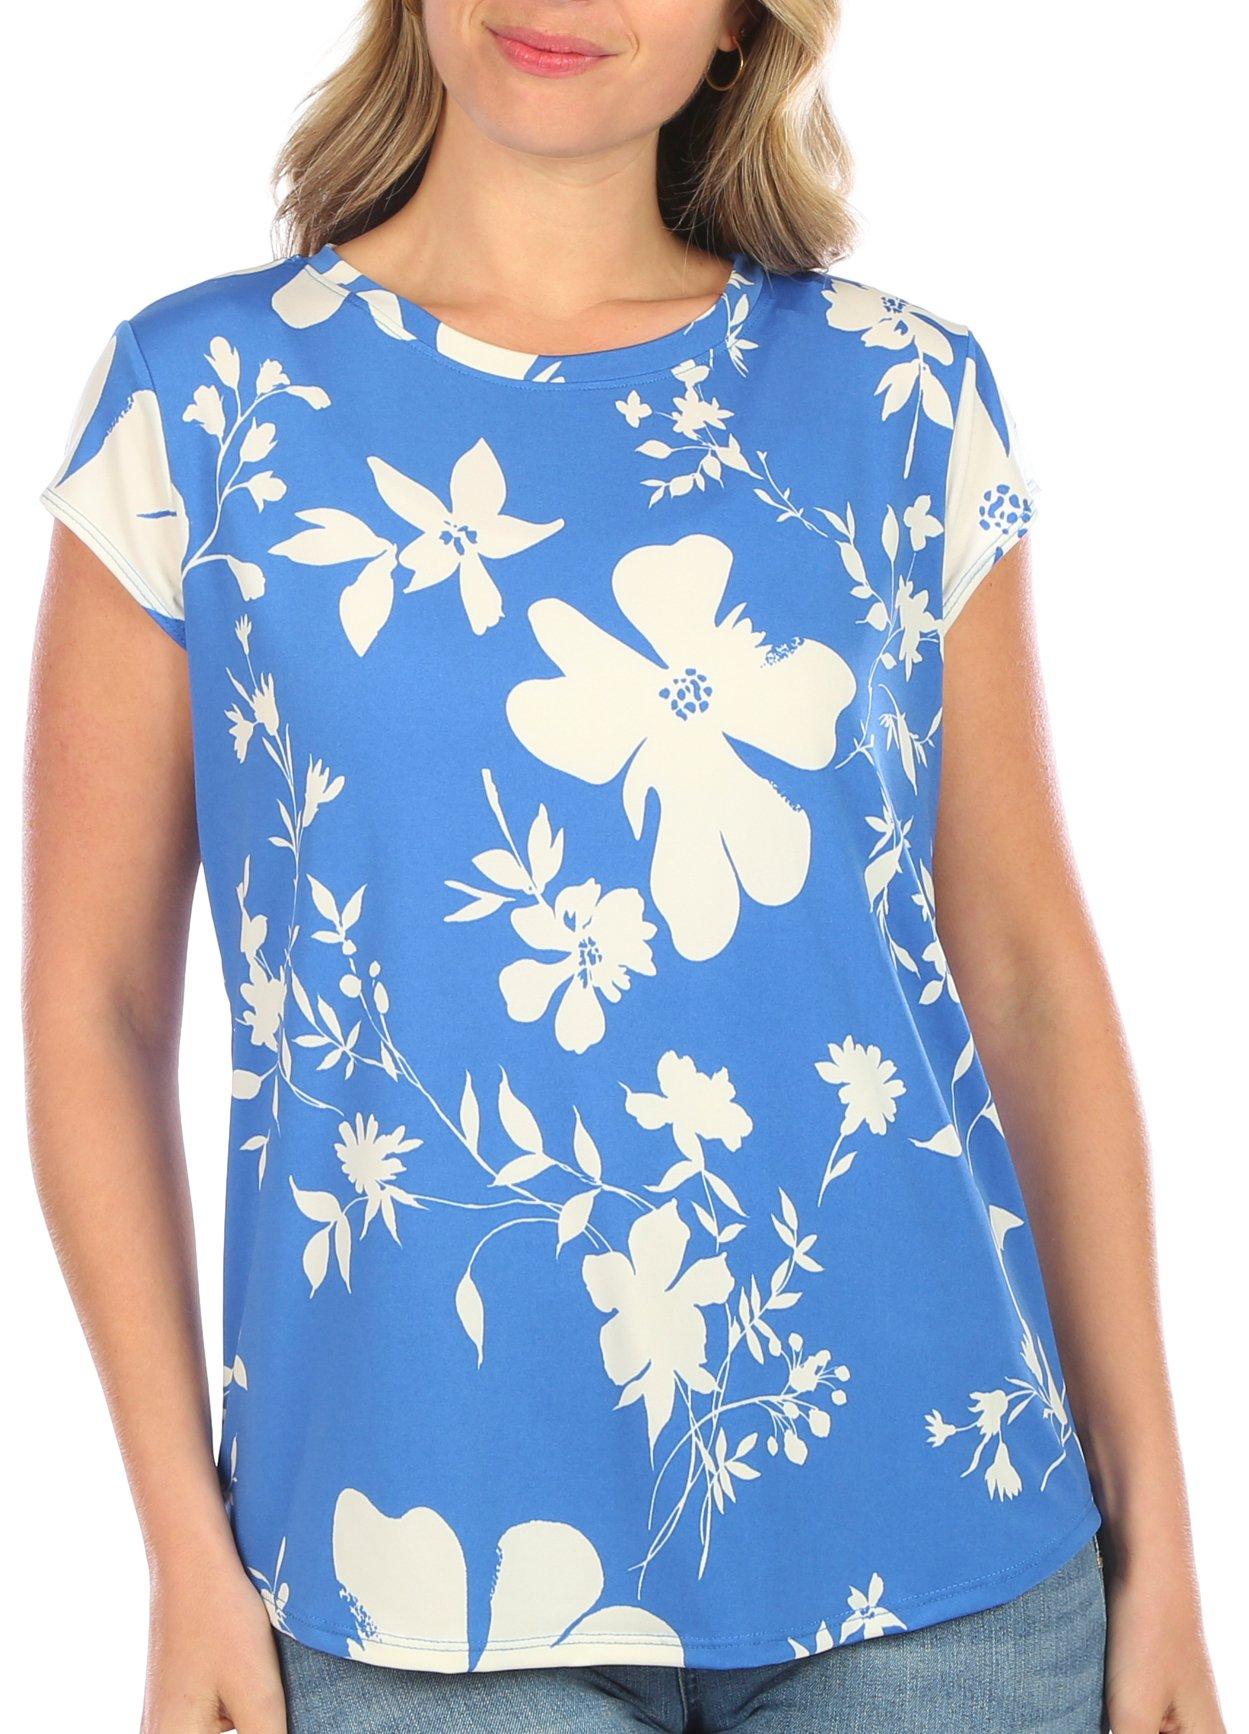 Blue Sol Womens Colorful Floral Print Cap Sleeve Top